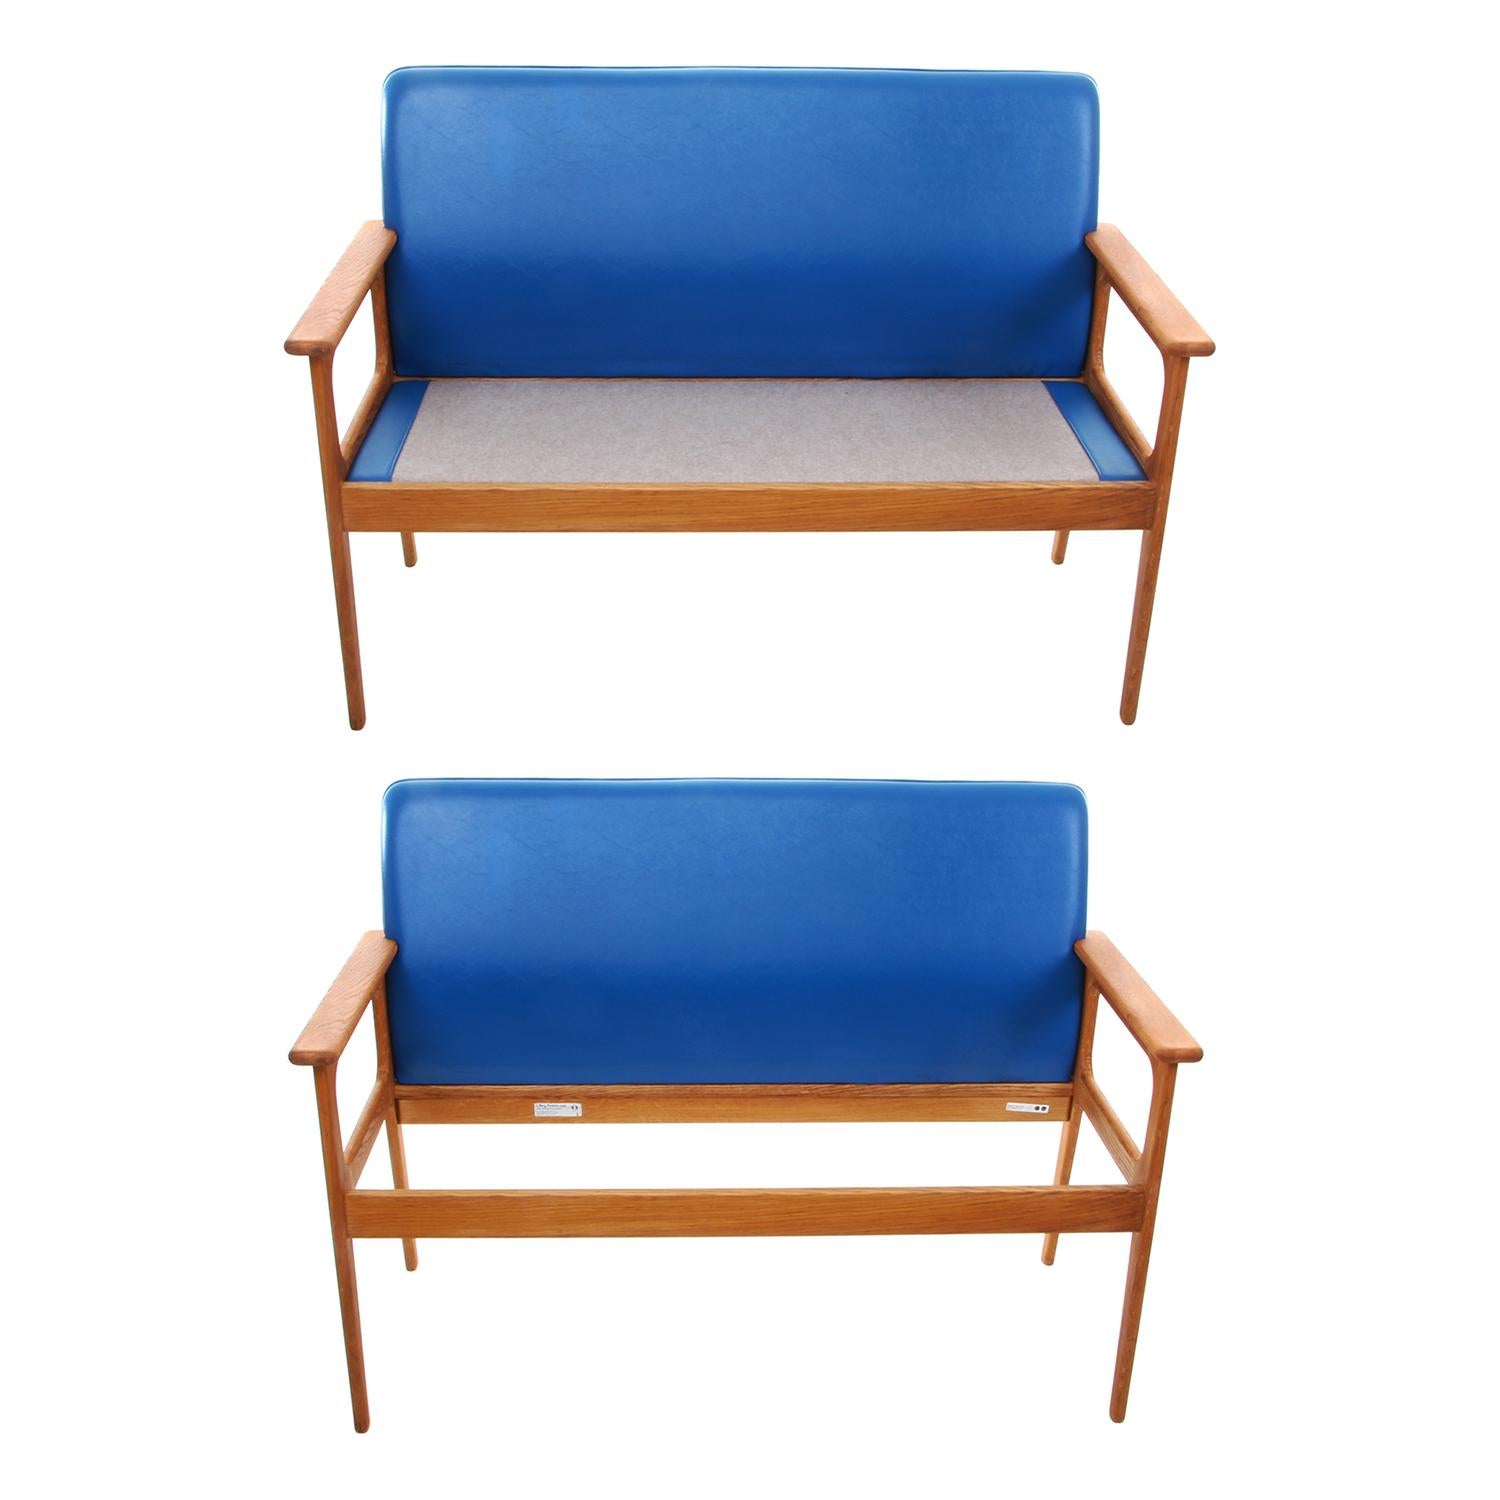 Two-Seat Sofa by Erik Buch 1970s Oil-Treated Oak Couch with Clear Blue Upholster 1